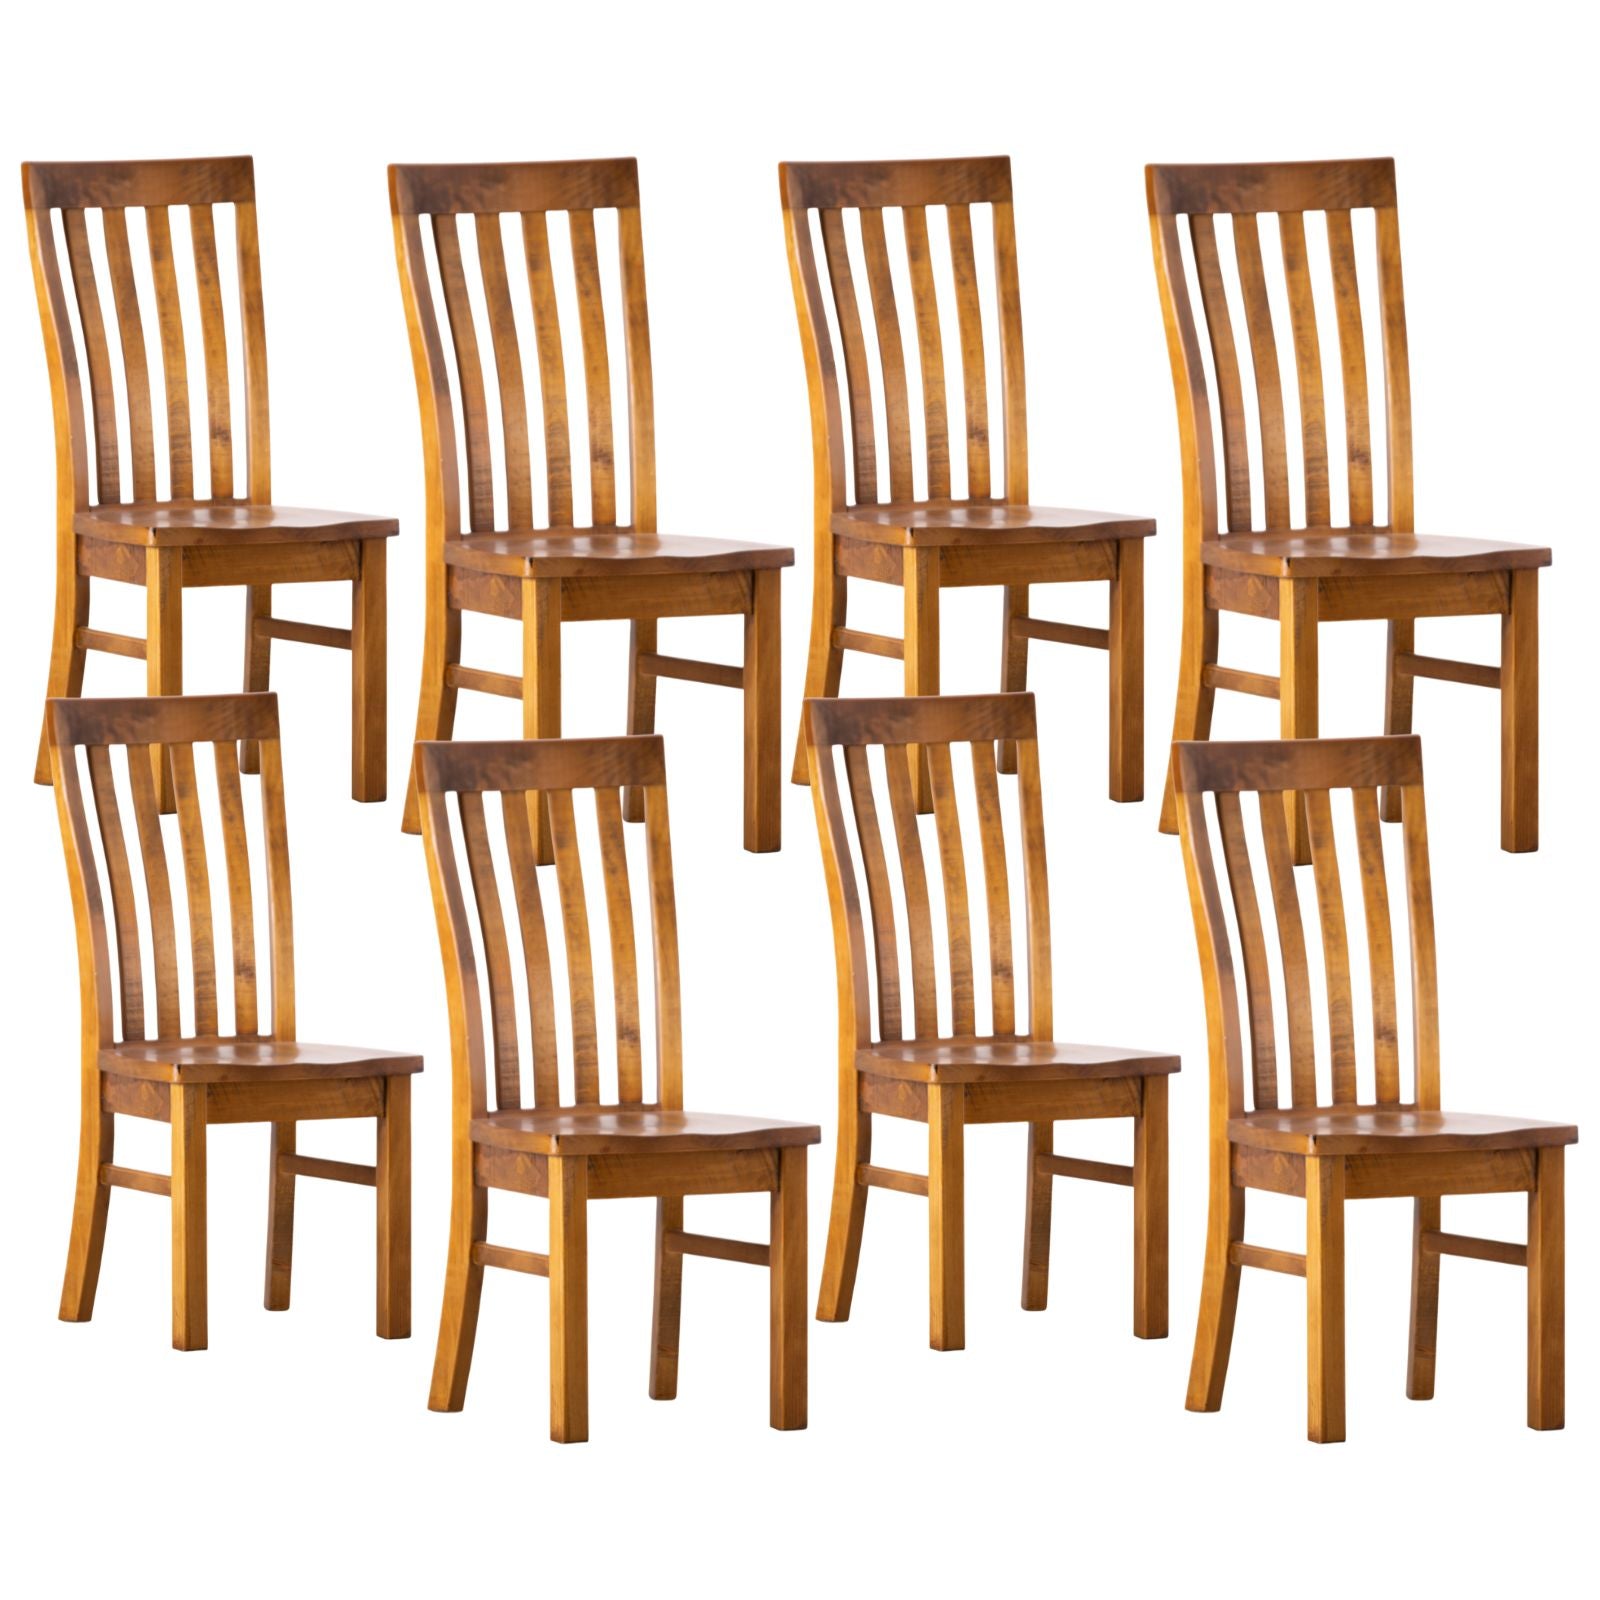 Teasel Dining Chair Set of 8 Solid Pine Timber Wood Seat - Rustic Oak